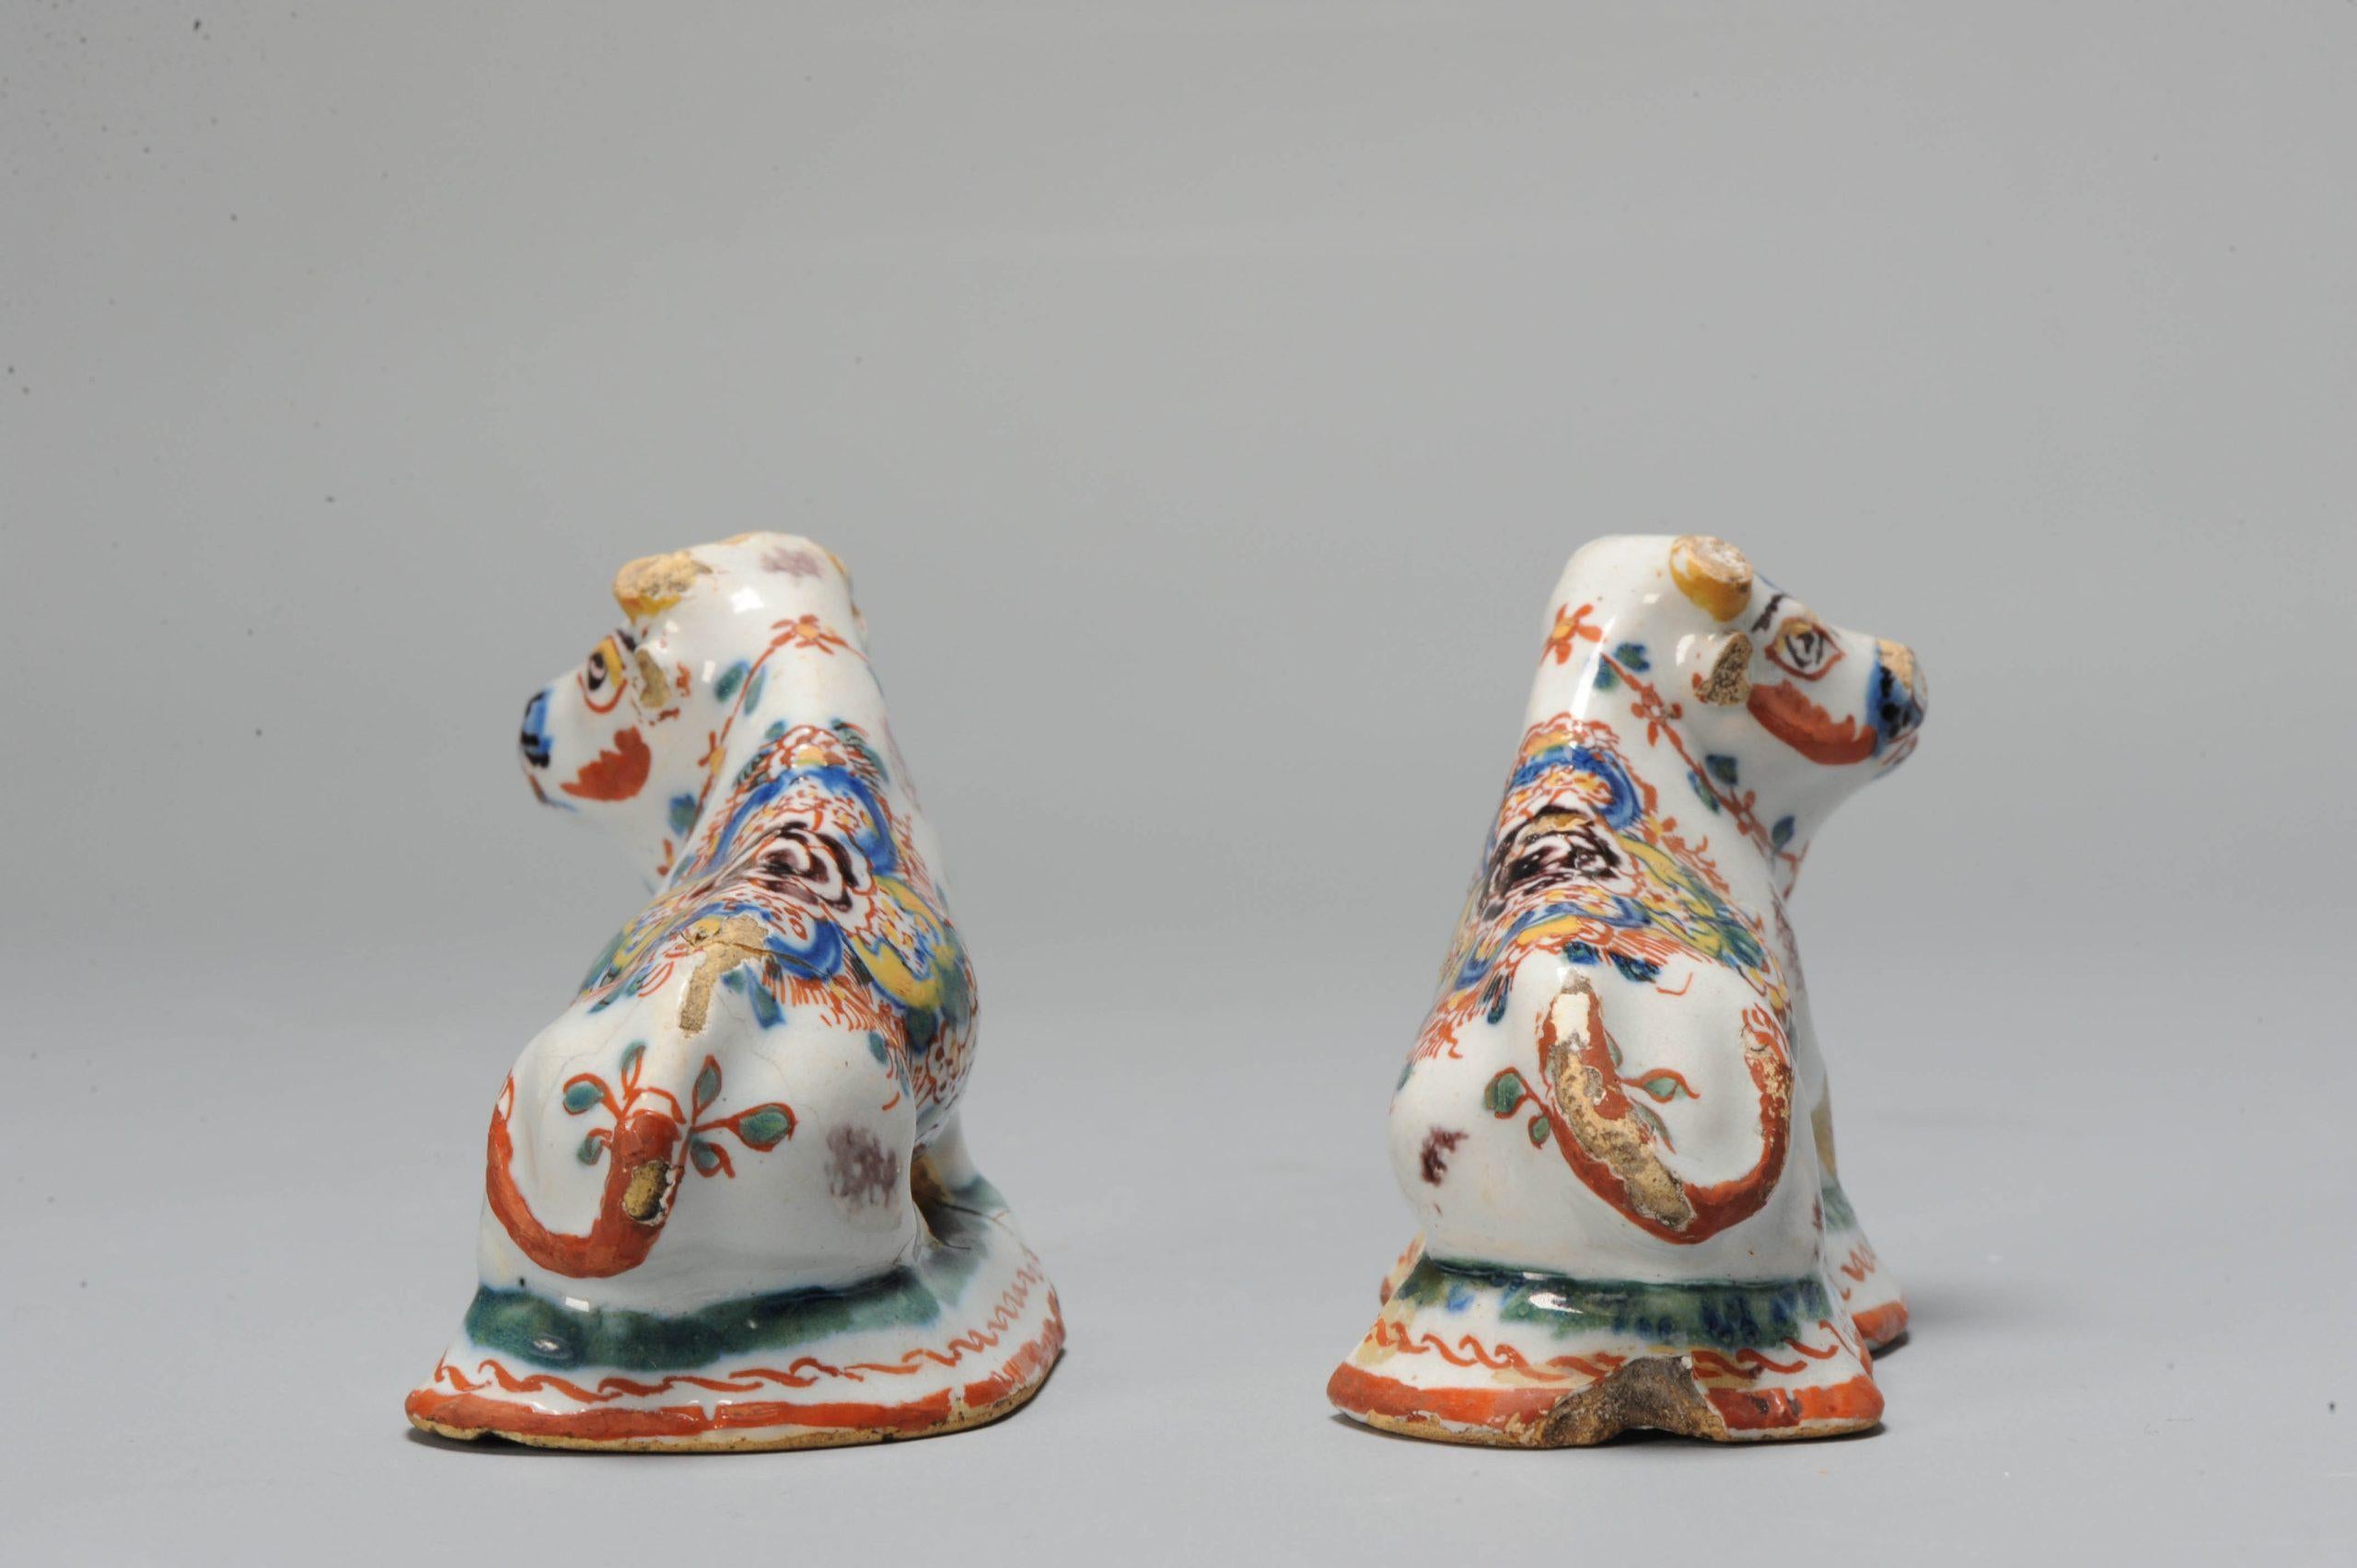 Unusual pair of two small Delft earthenware cows with enamel. They had rough life but still very nice.

Additional information:
Material: Porcelain & Pottery
Region of Origin: Europe
Period: 18th century
Condition: Both restored and